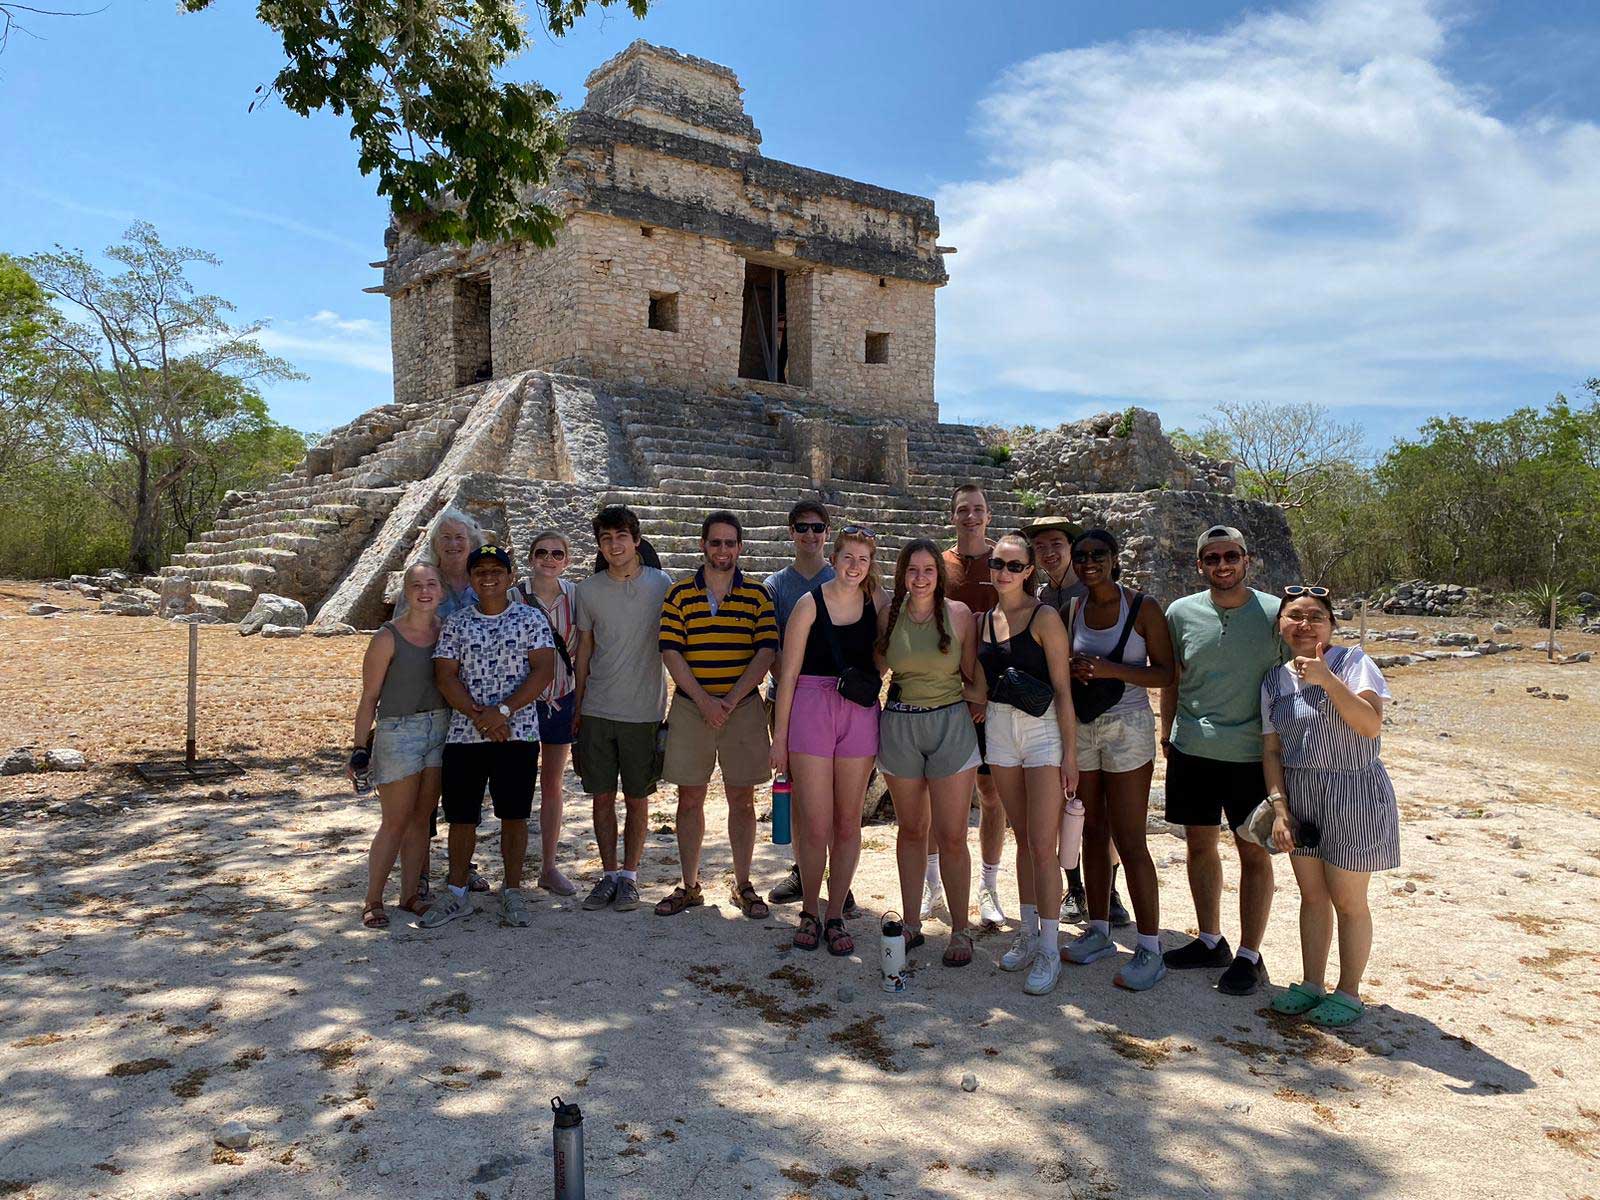 A group of students and professors stands in front of Mayan ruins in Mexico, on a sunny day with blue skies.